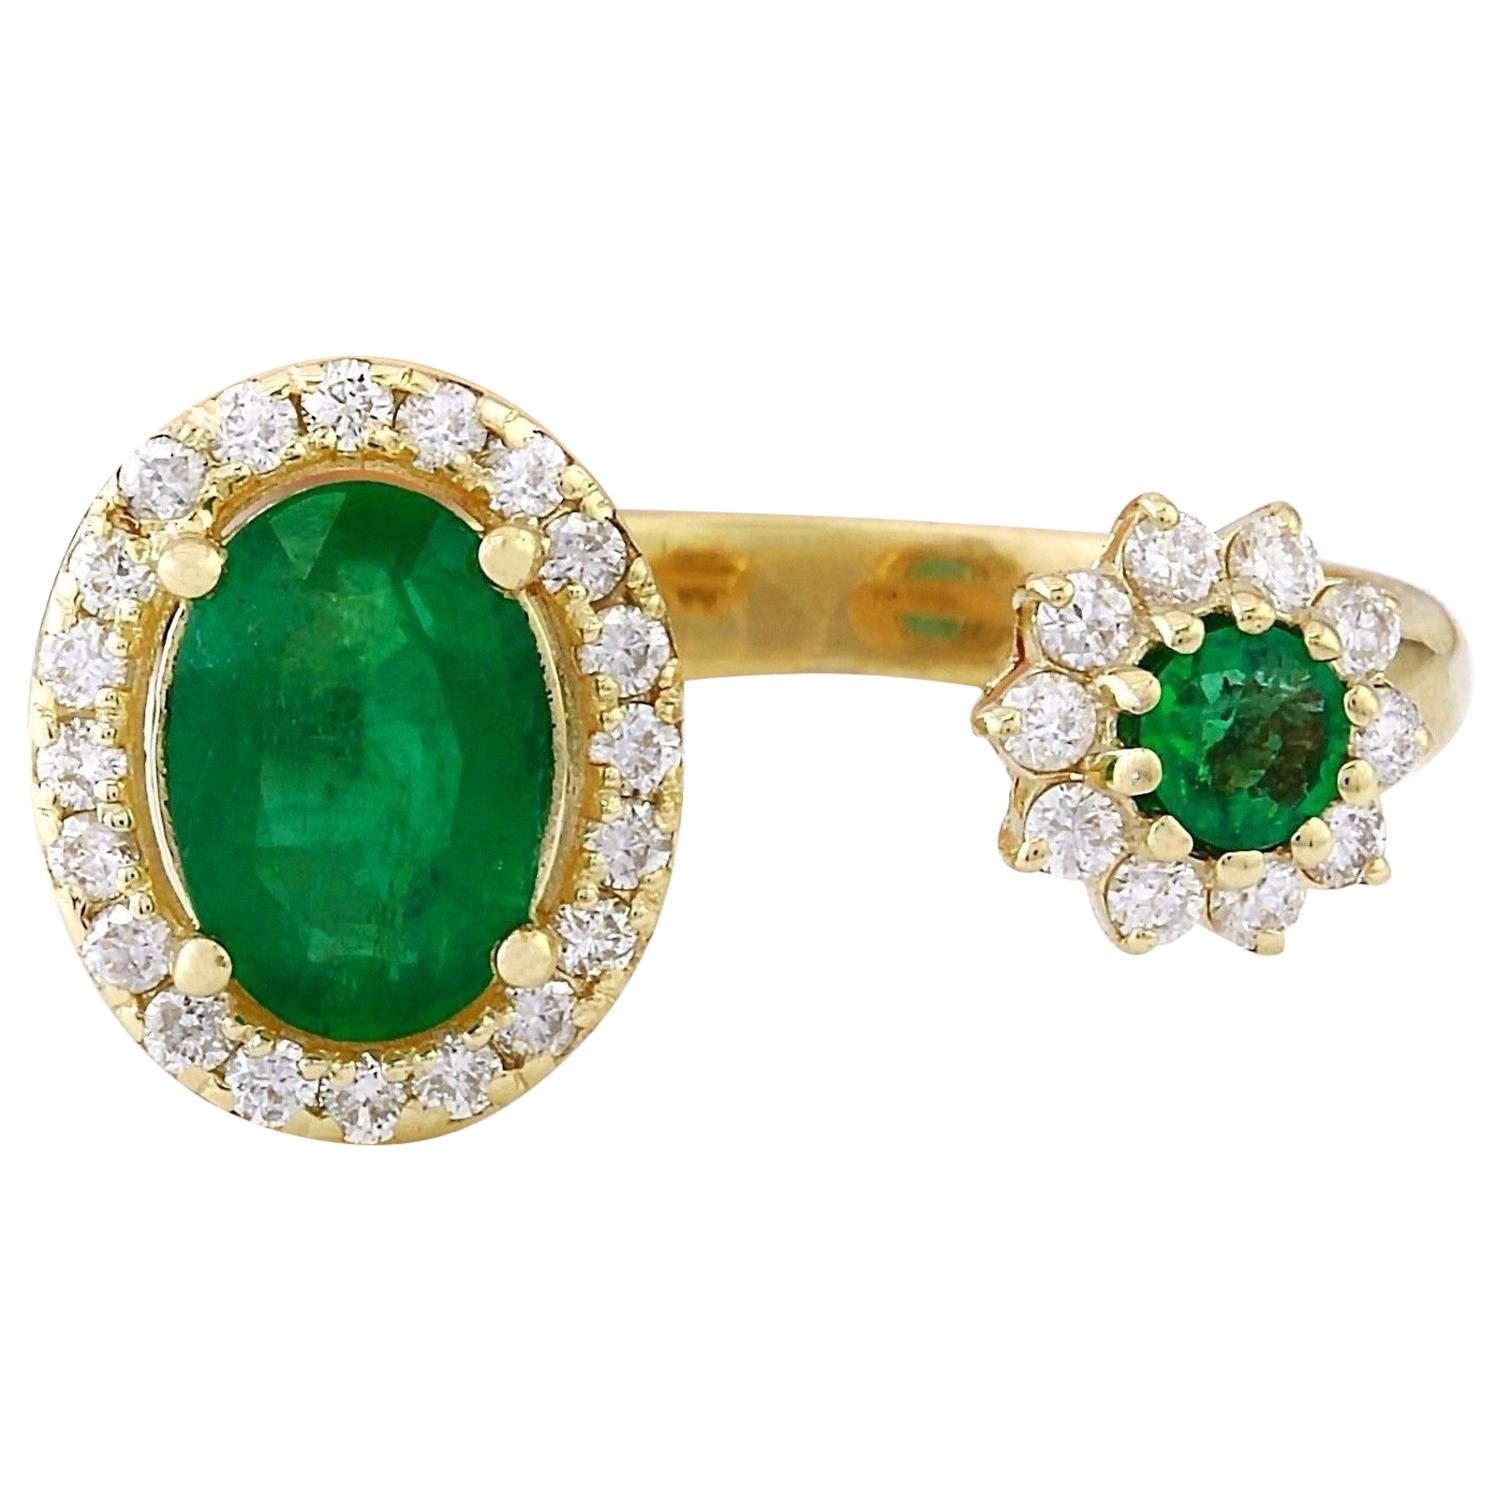 1.20 Carat Natural Emerald 14K Solid Yellow Gold Diamond Ring
 Item Type: Ring
 Item Style: Open
 Material: 14K Yellow Gold
 Mainstone: Emerald
 Stone Color: Green
 Stone Weight: 0.90 Carat
 Stone Shape: Oval
 Stone Quantity: 1
 Stone Dimensions: